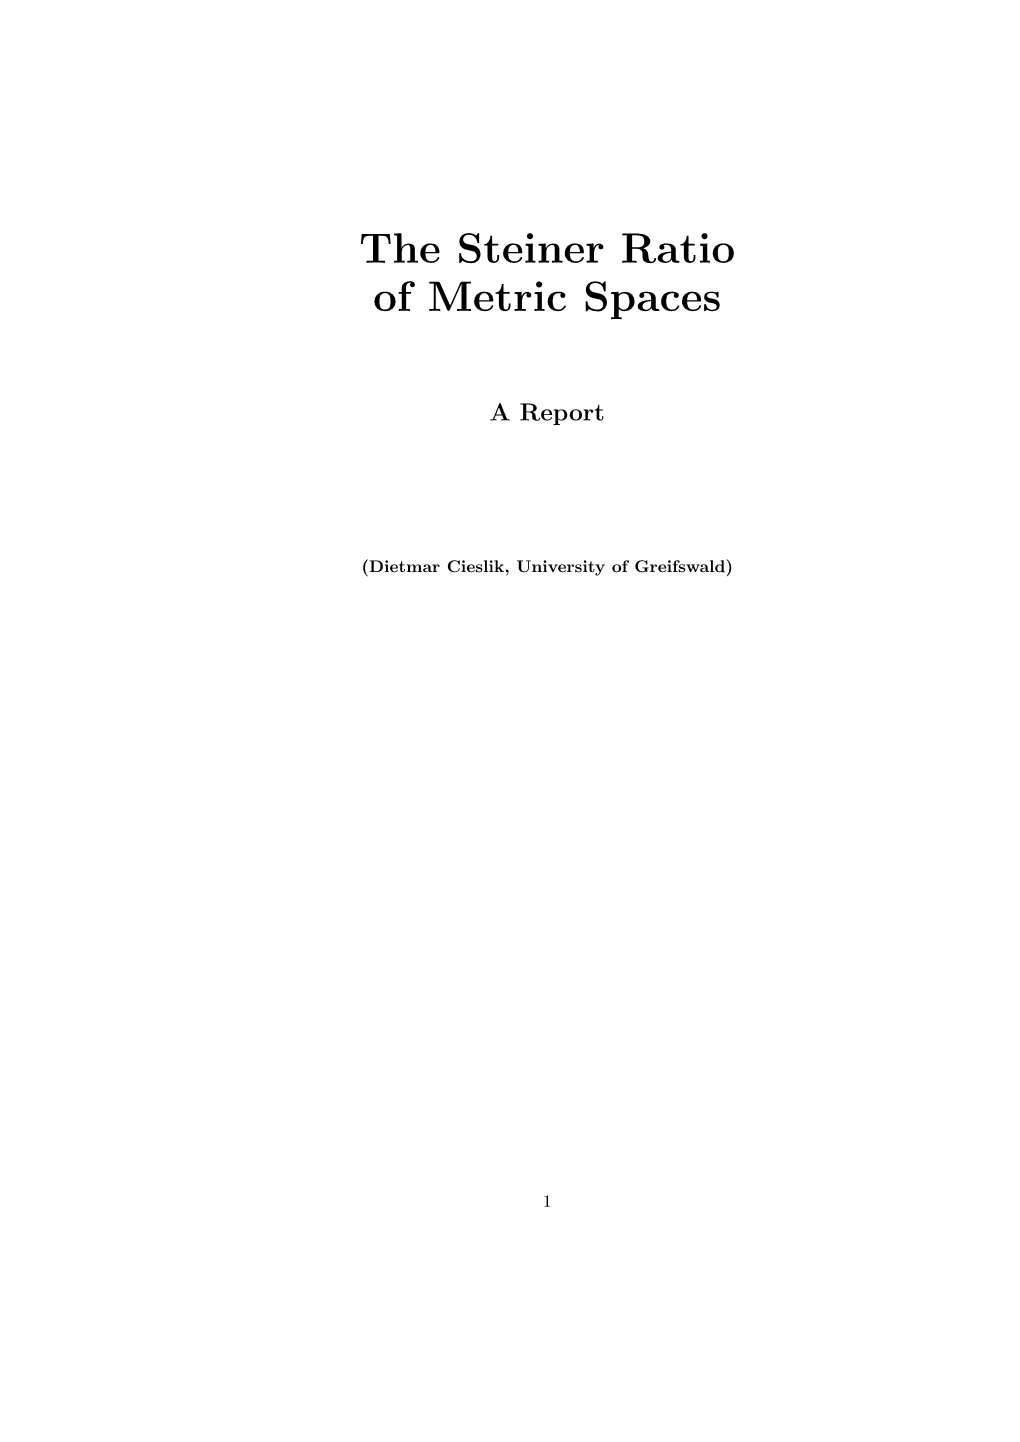 The Steiner Ratio of Metric Spaces